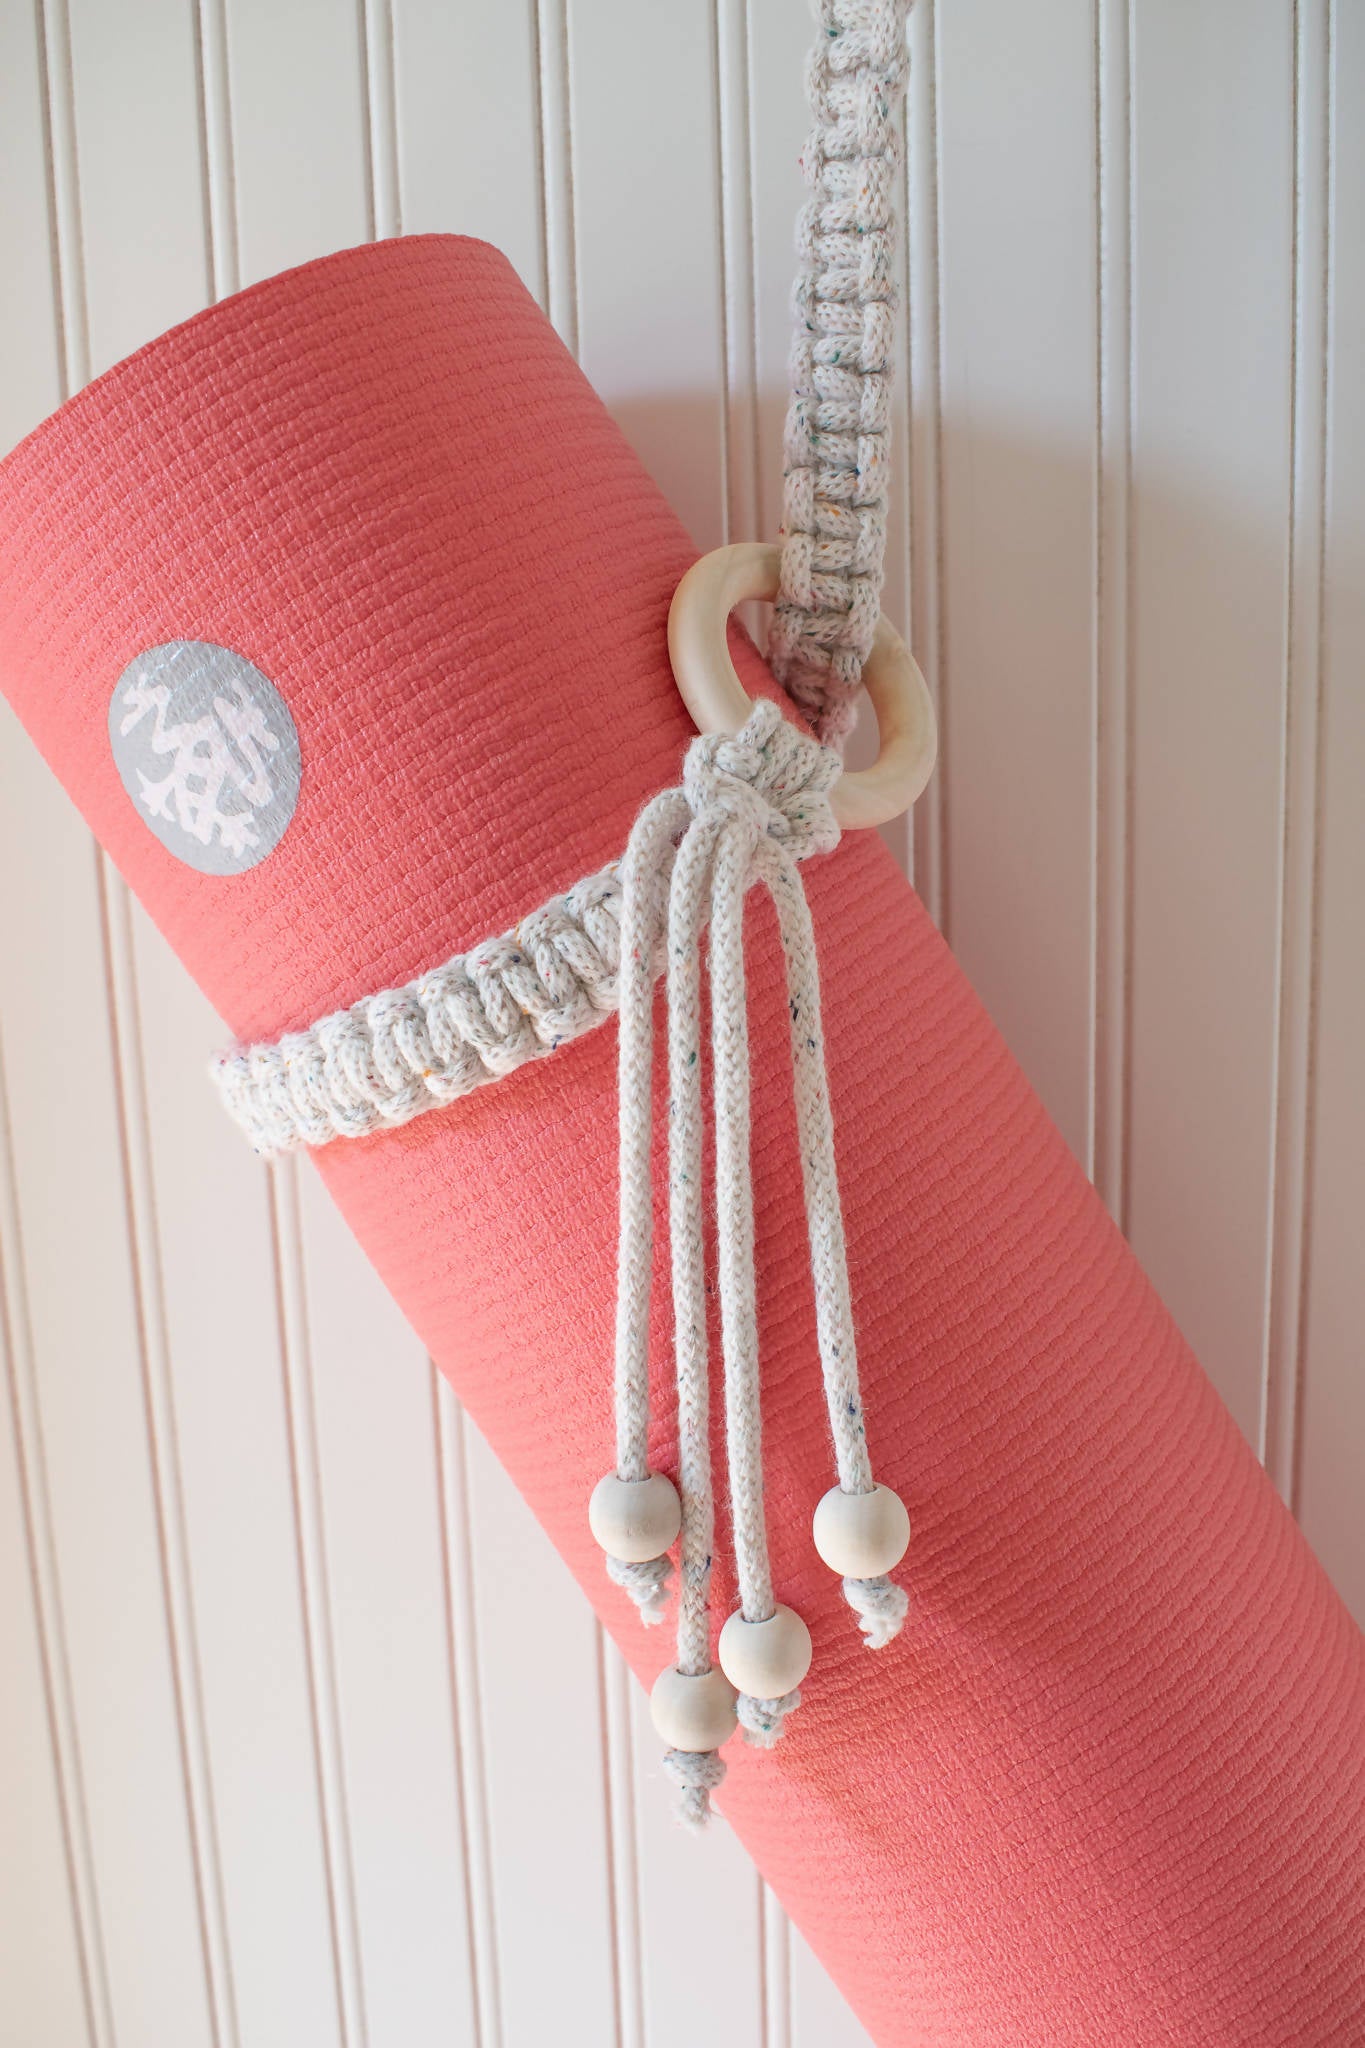 Macrame Yoga Mat Carrying Strap with tassels and wooden beads